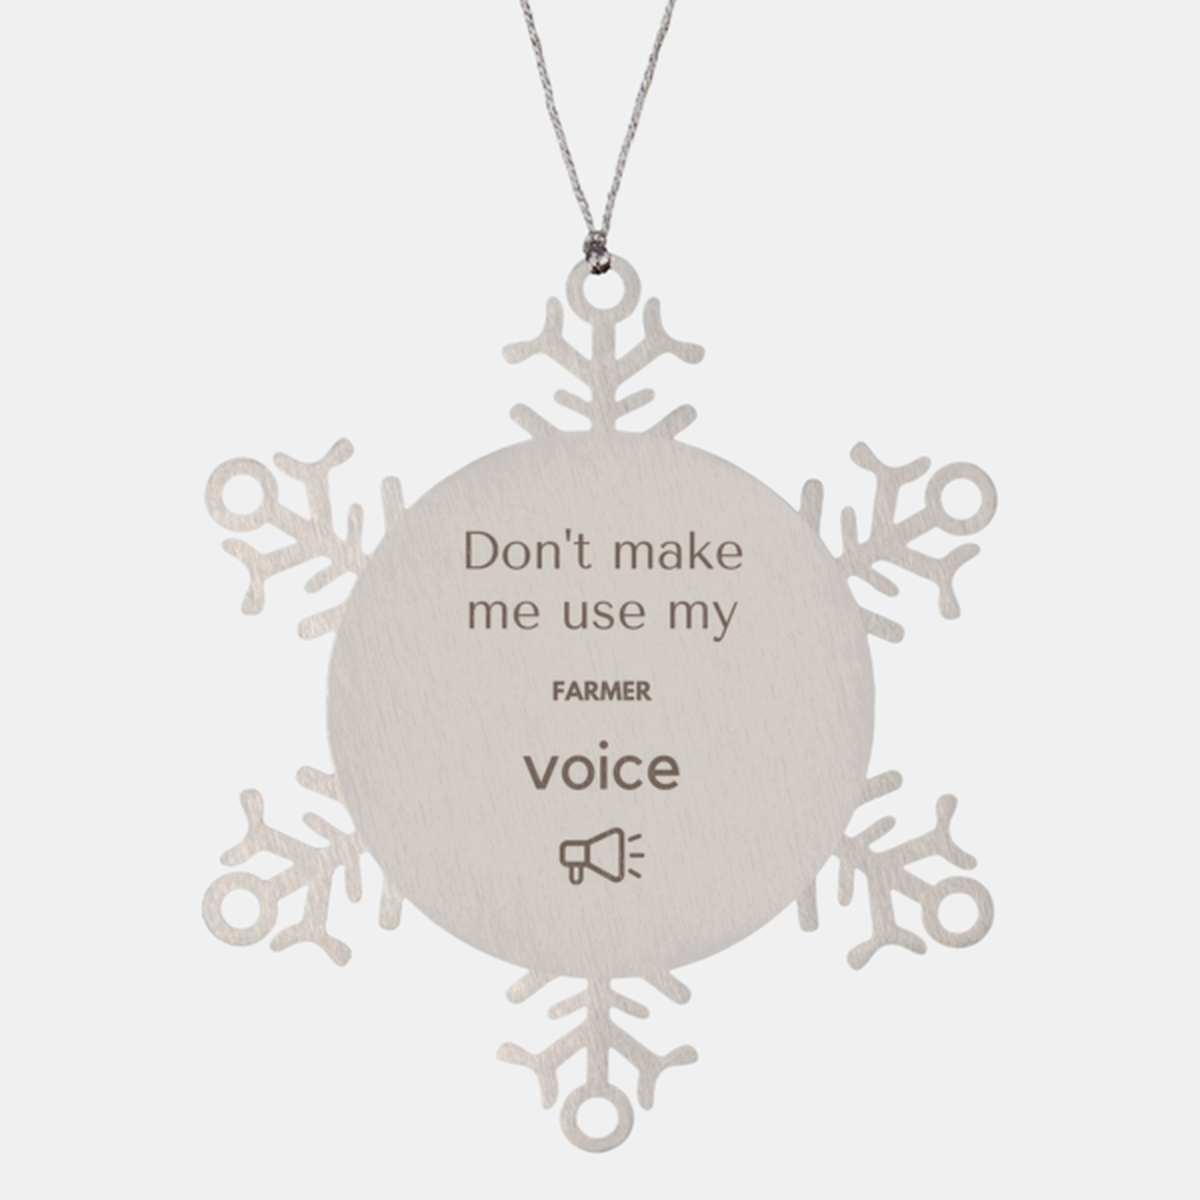 Don't make me use my Farmer voice, Sarcasm Farmer Ornament Gifts, Christmas Farmer Snowflake Ornament Unique Gifts For Farmer Coworkers, Men, Women, Colleague, Friends